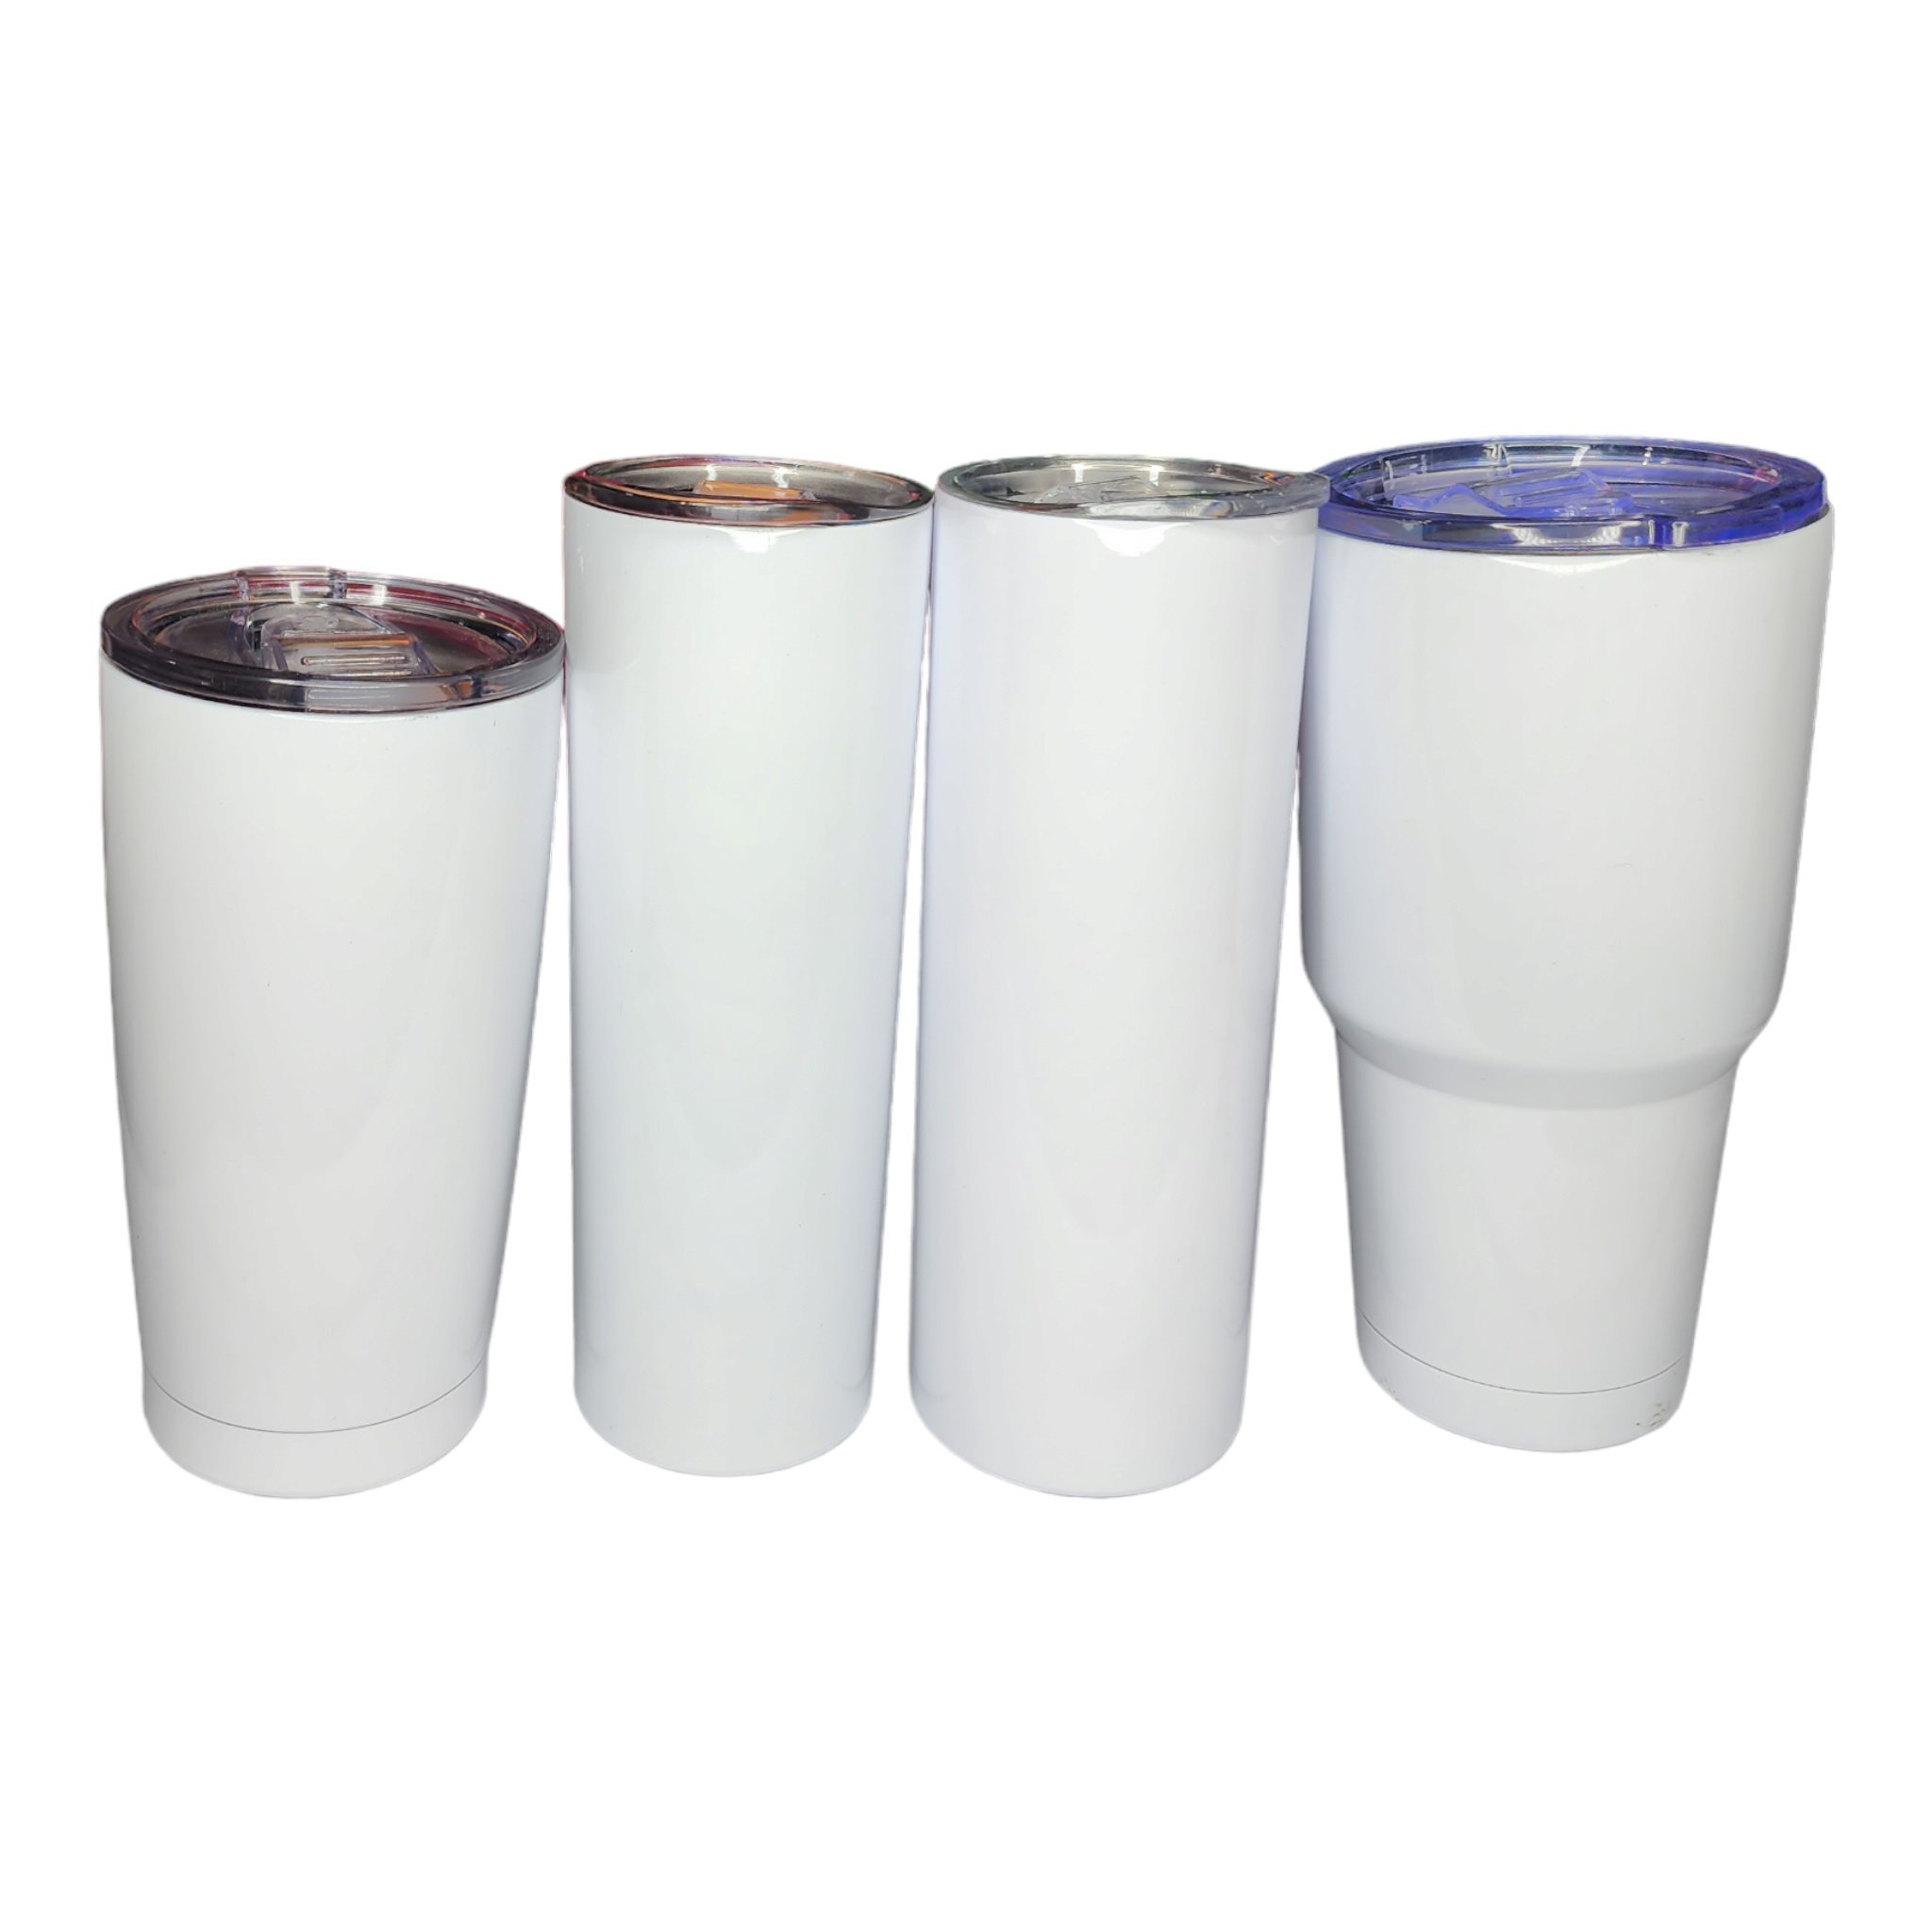 Pack of 30) 9oz or 12oz White Sippy Sublimation Blank Tumbler – Sayers & Co.